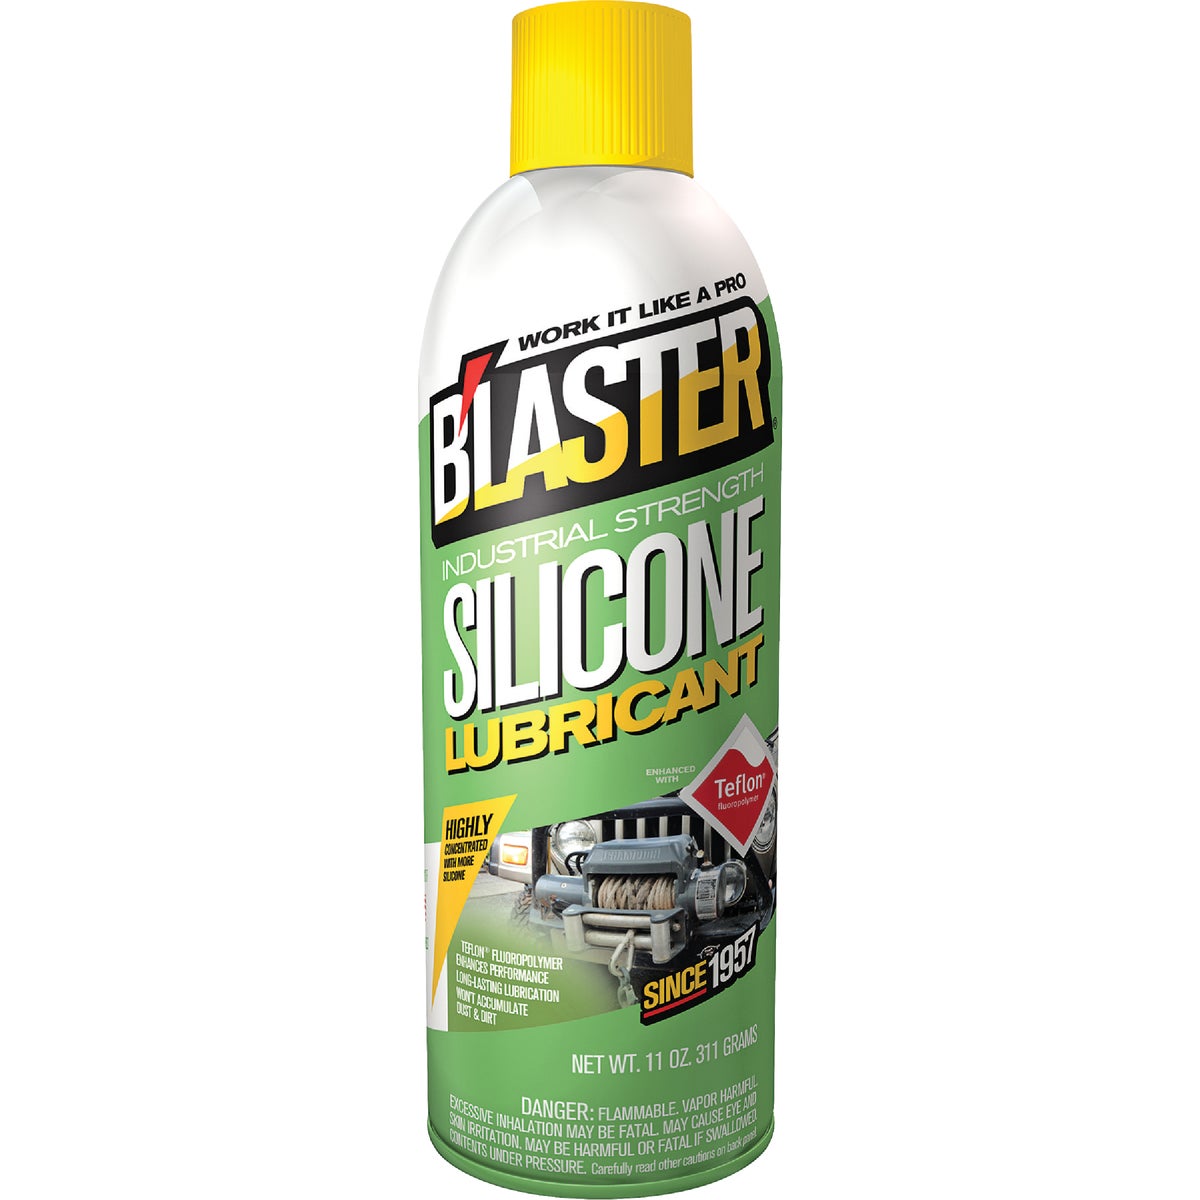 Item 571447, Super concentrated silicone lube provides the ultimate in lubrication and 